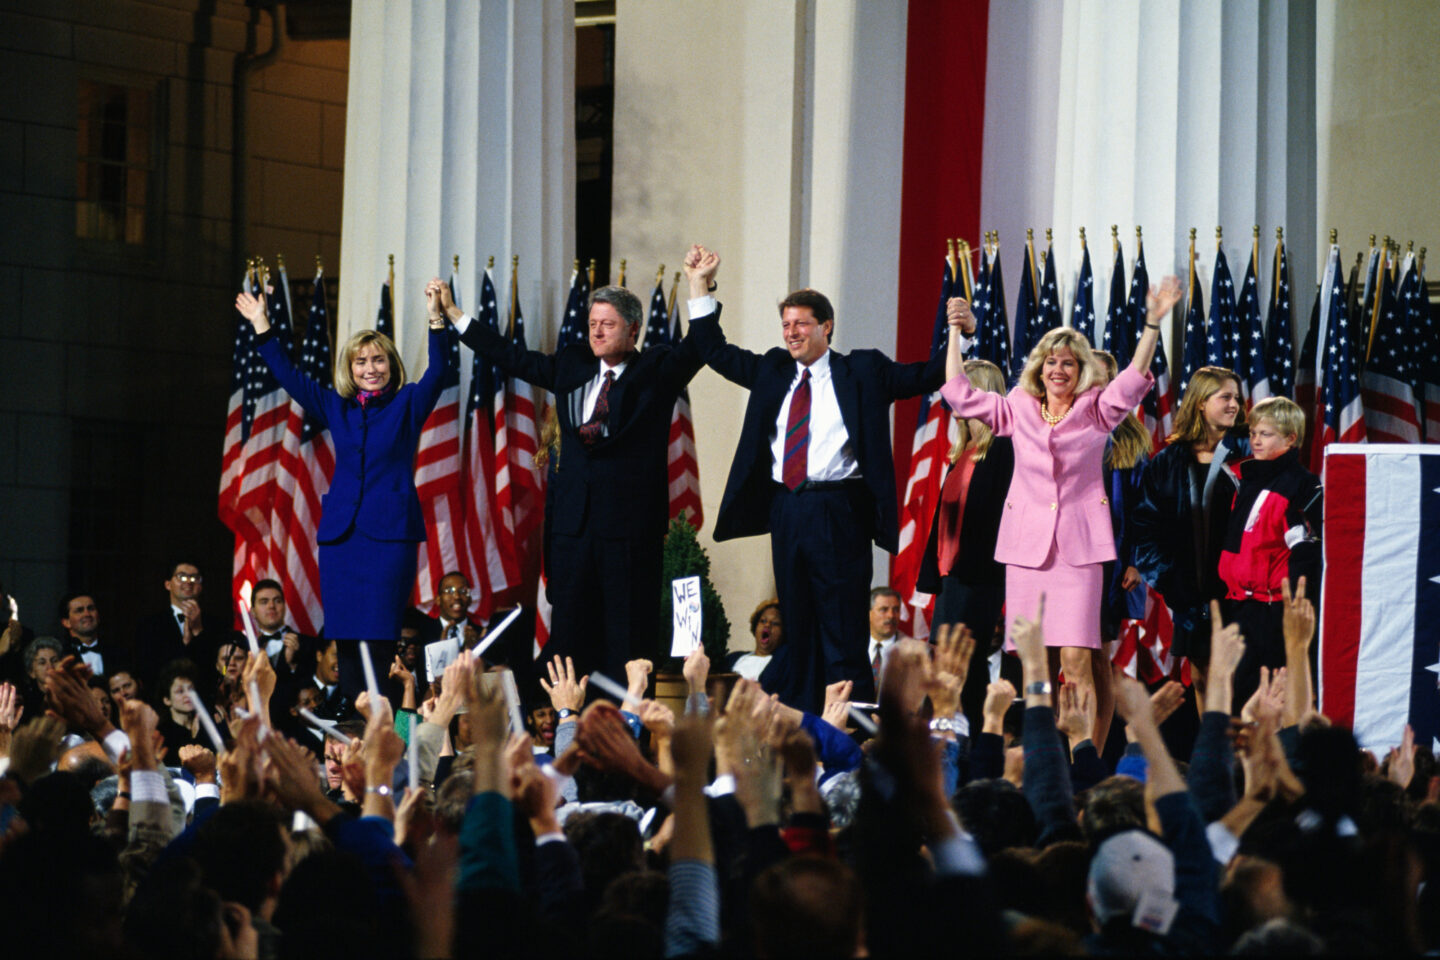 President-elect Bill Clinton and Vice President-elect Al Gore celebrate on stage.